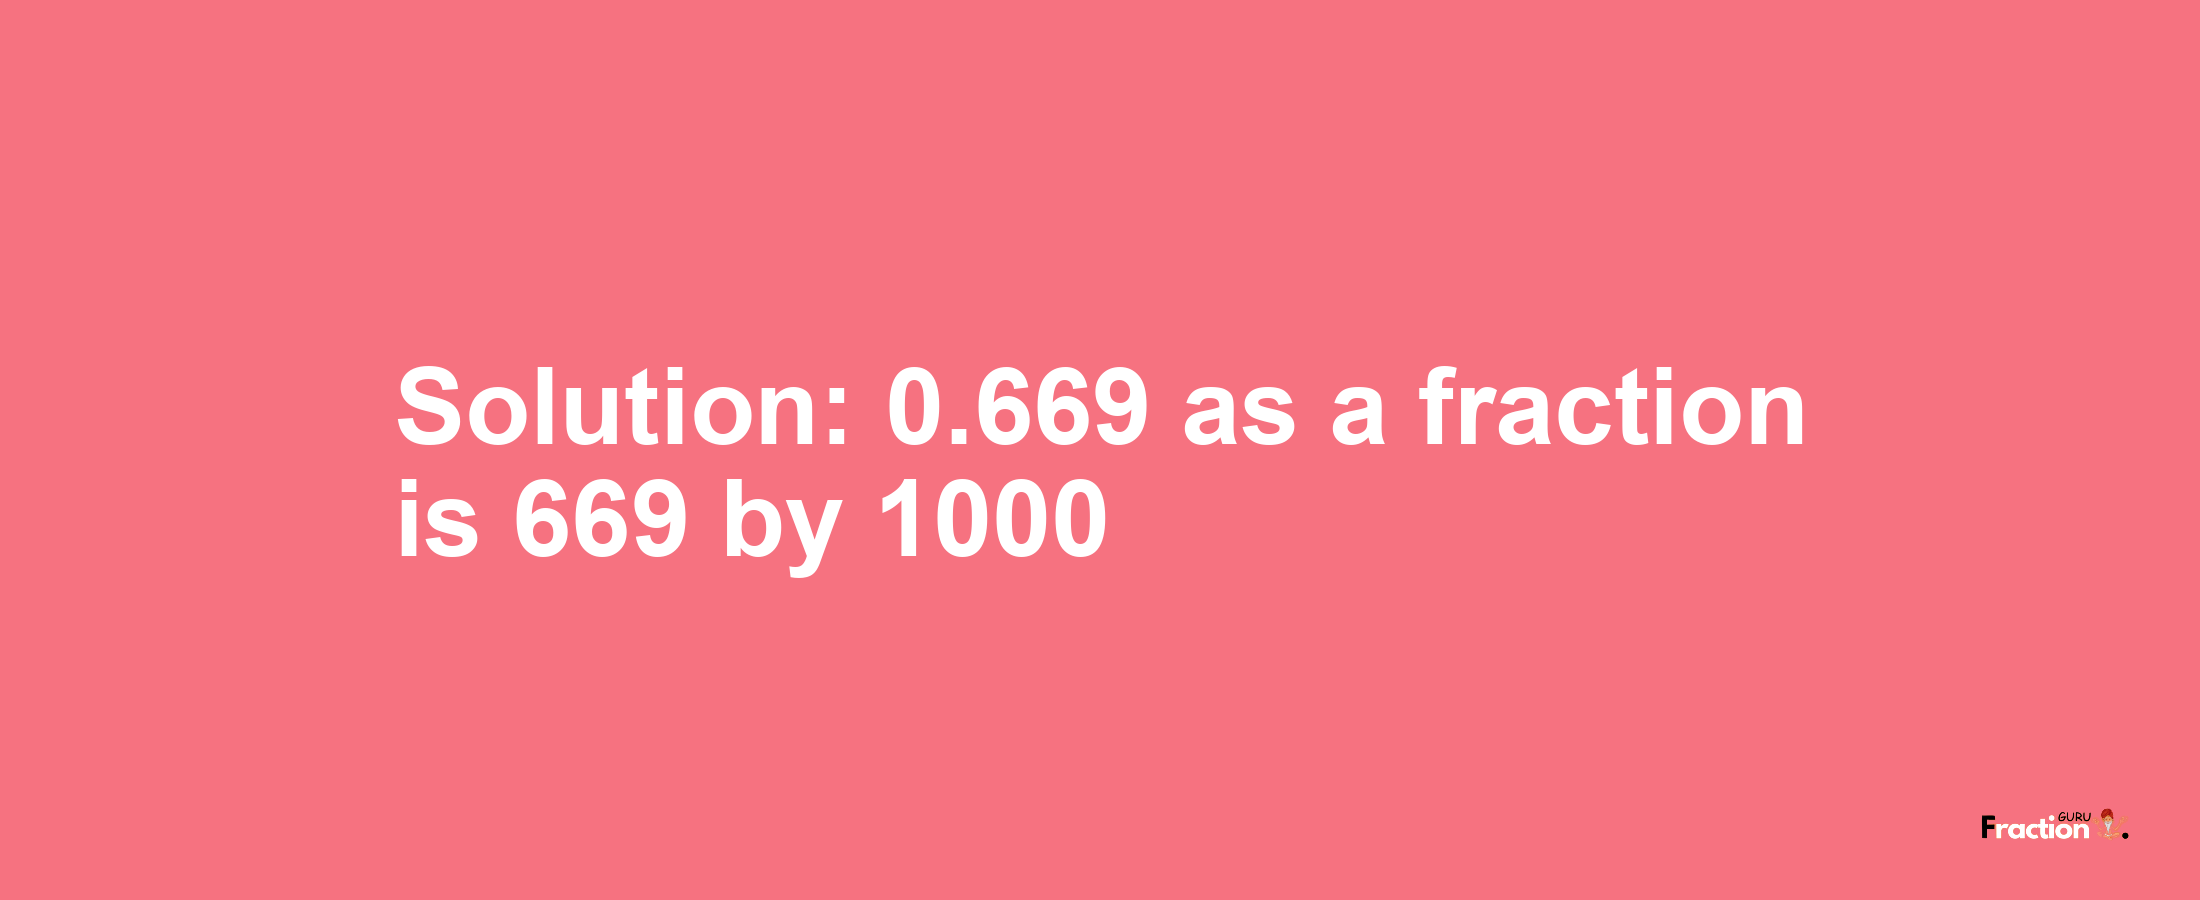 Solution:0.669 as a fraction is 669/1000